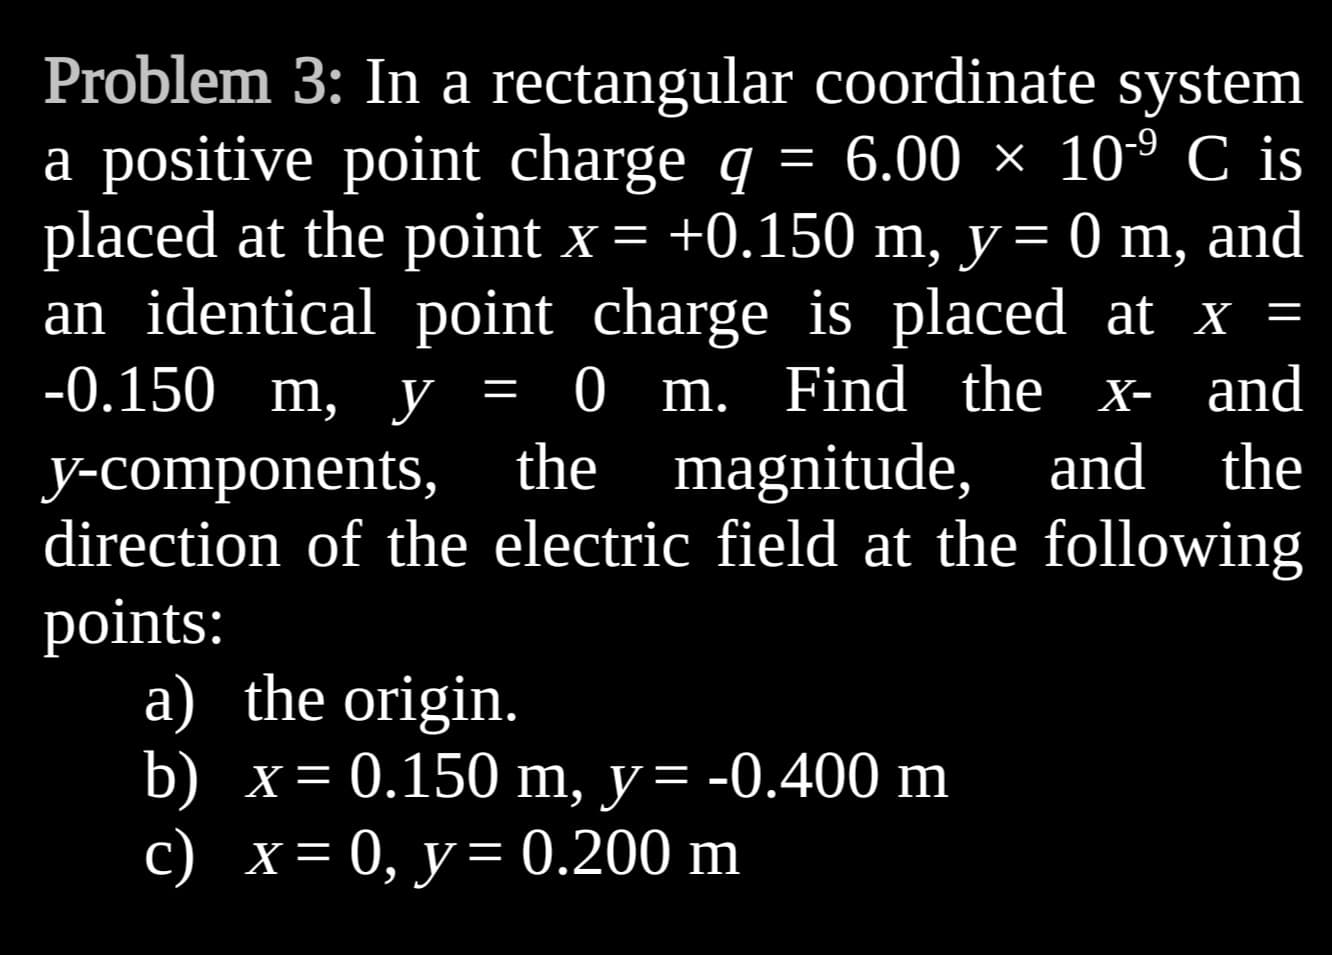 Problem 3: In a rectangular
coordinate system
-9
=
a positive point charge q 6.00 × 10-⁹ C is
placed at the point x = +0.150 m, y = 0 m, and
an identical point charge is placed at x
-0.150 m, y
0 m. Find the x- and
the
=
=
and
y-components, the magnitude, and
direction of the electric field at the following
points:
a) the origin.
b) x= =
0.150 m, y = -0.400 m
c) x = 0, y = 0.200 m